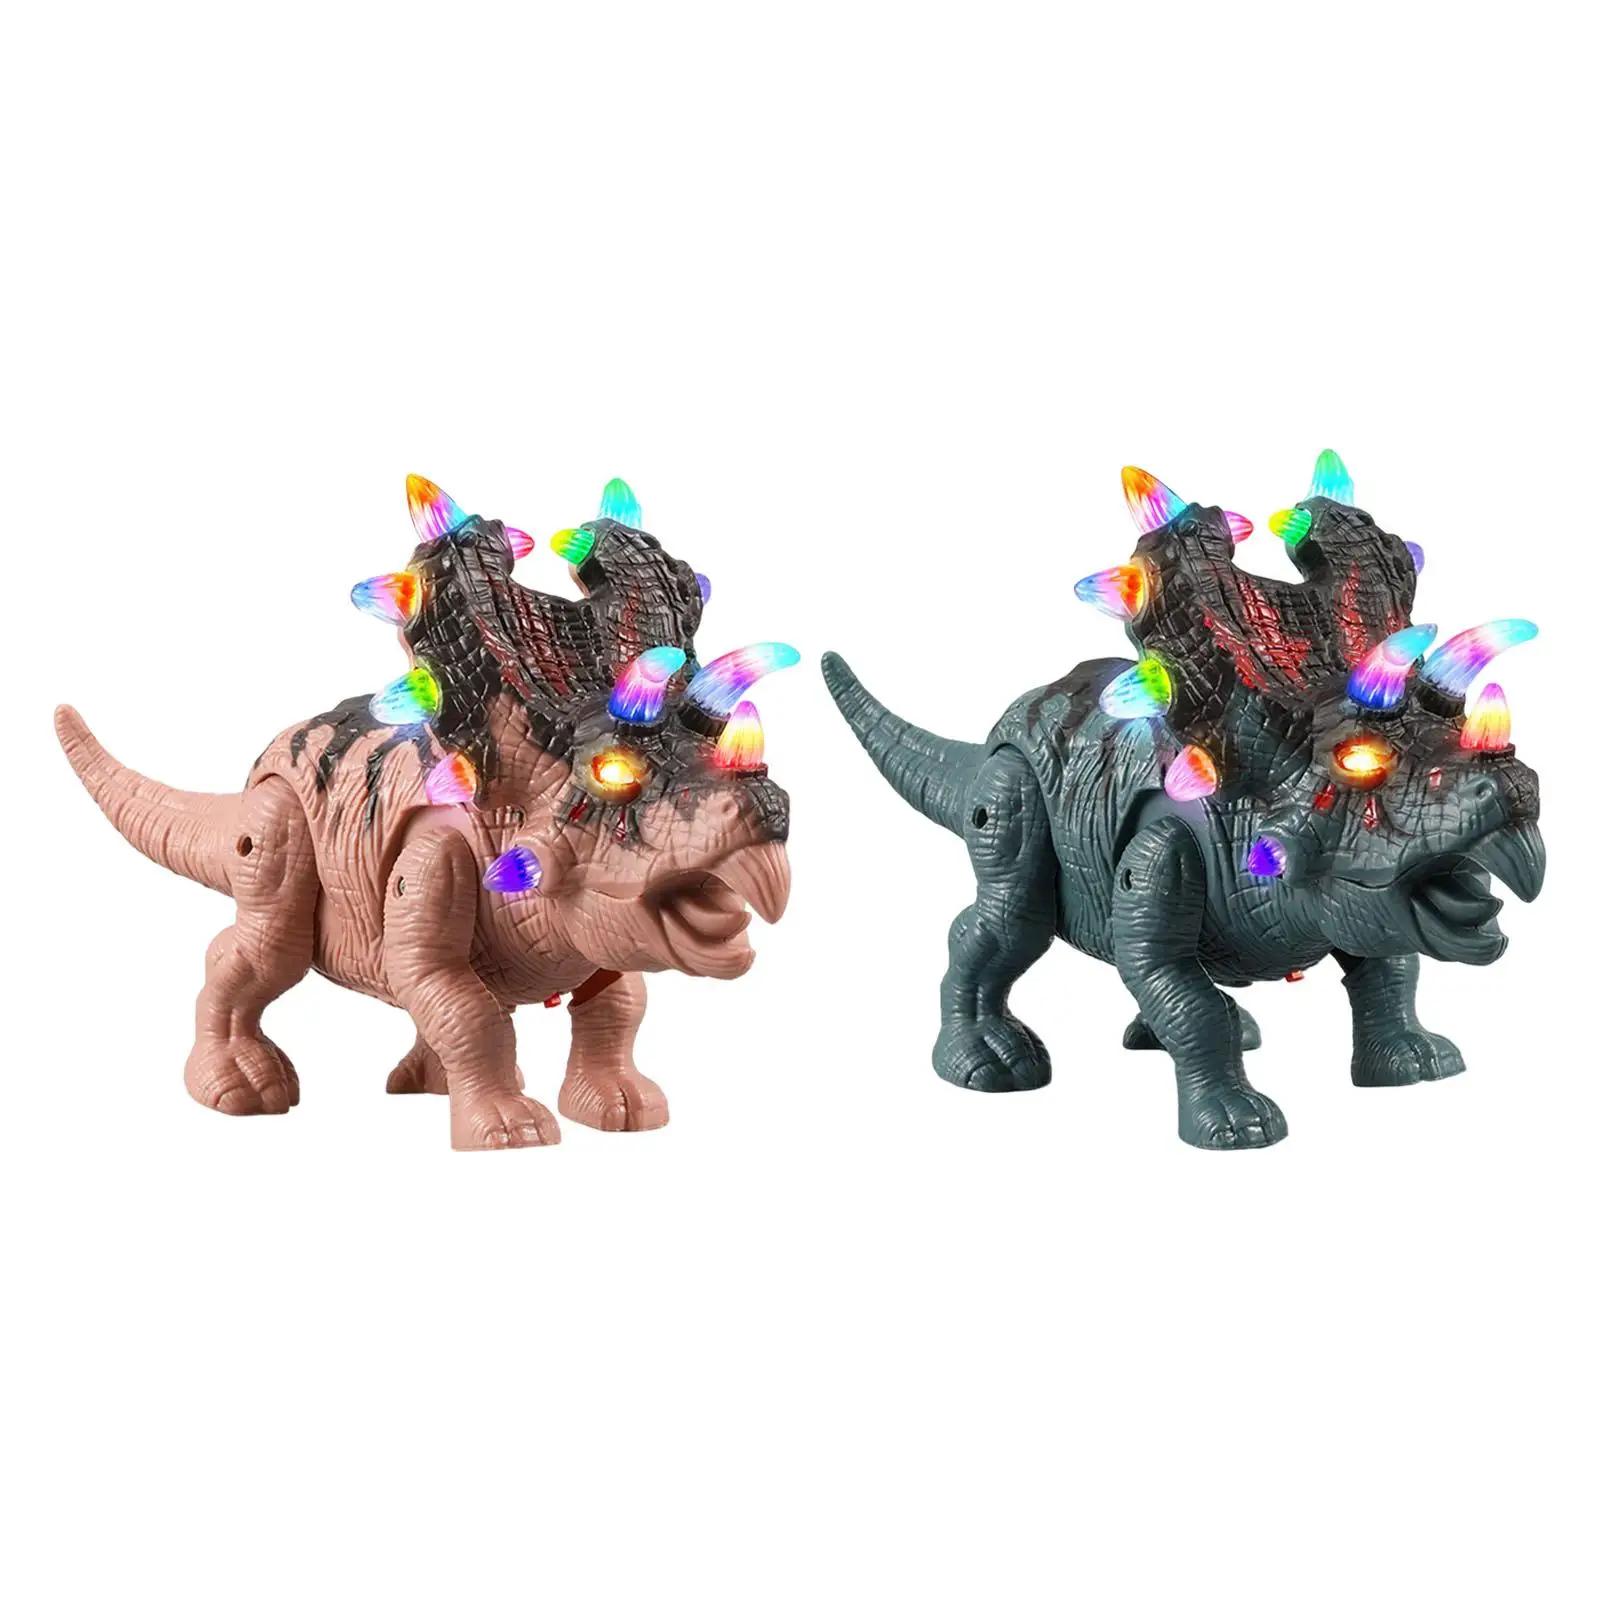 Simulation Walking Robot Dinosaur Action Figure with Sounds for Girls